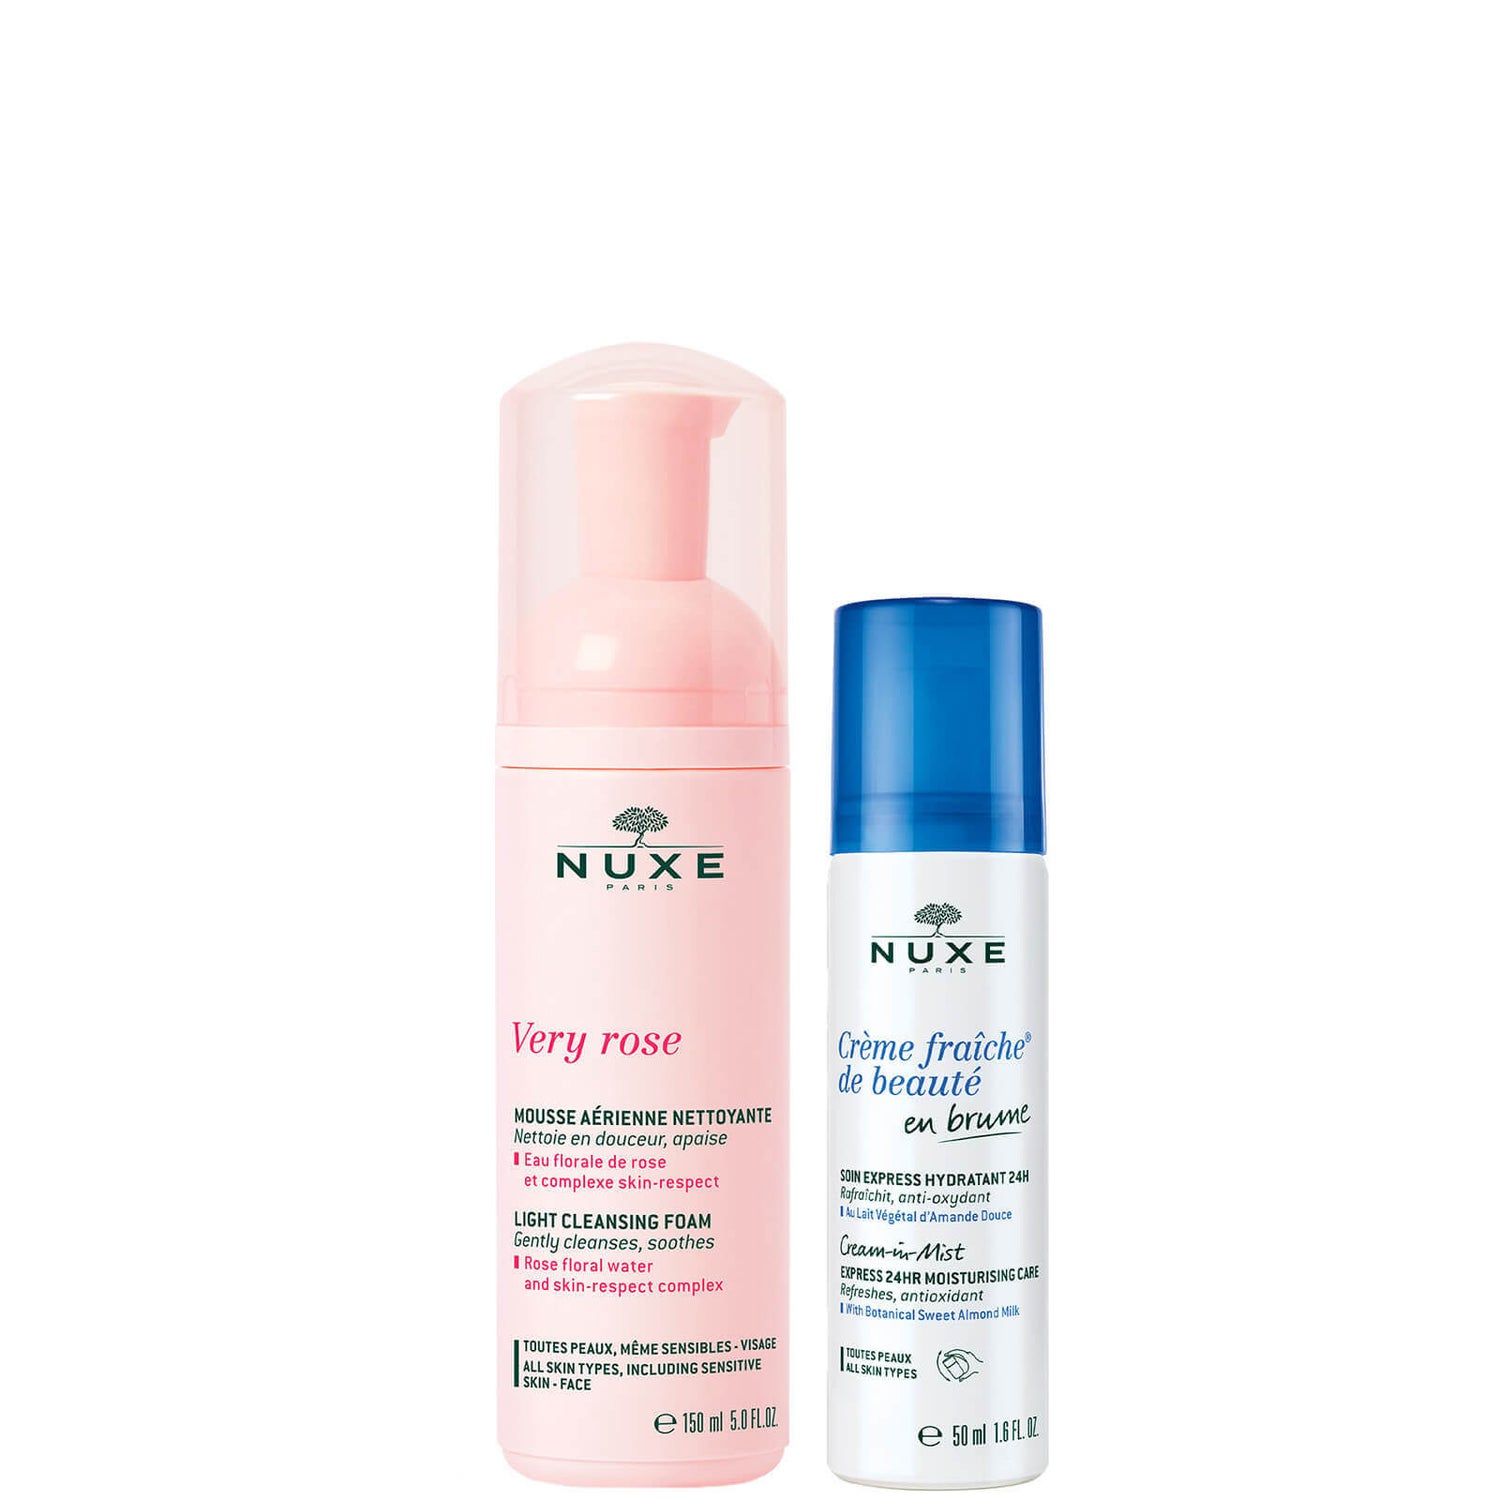 NUXE Express Hydration Routine